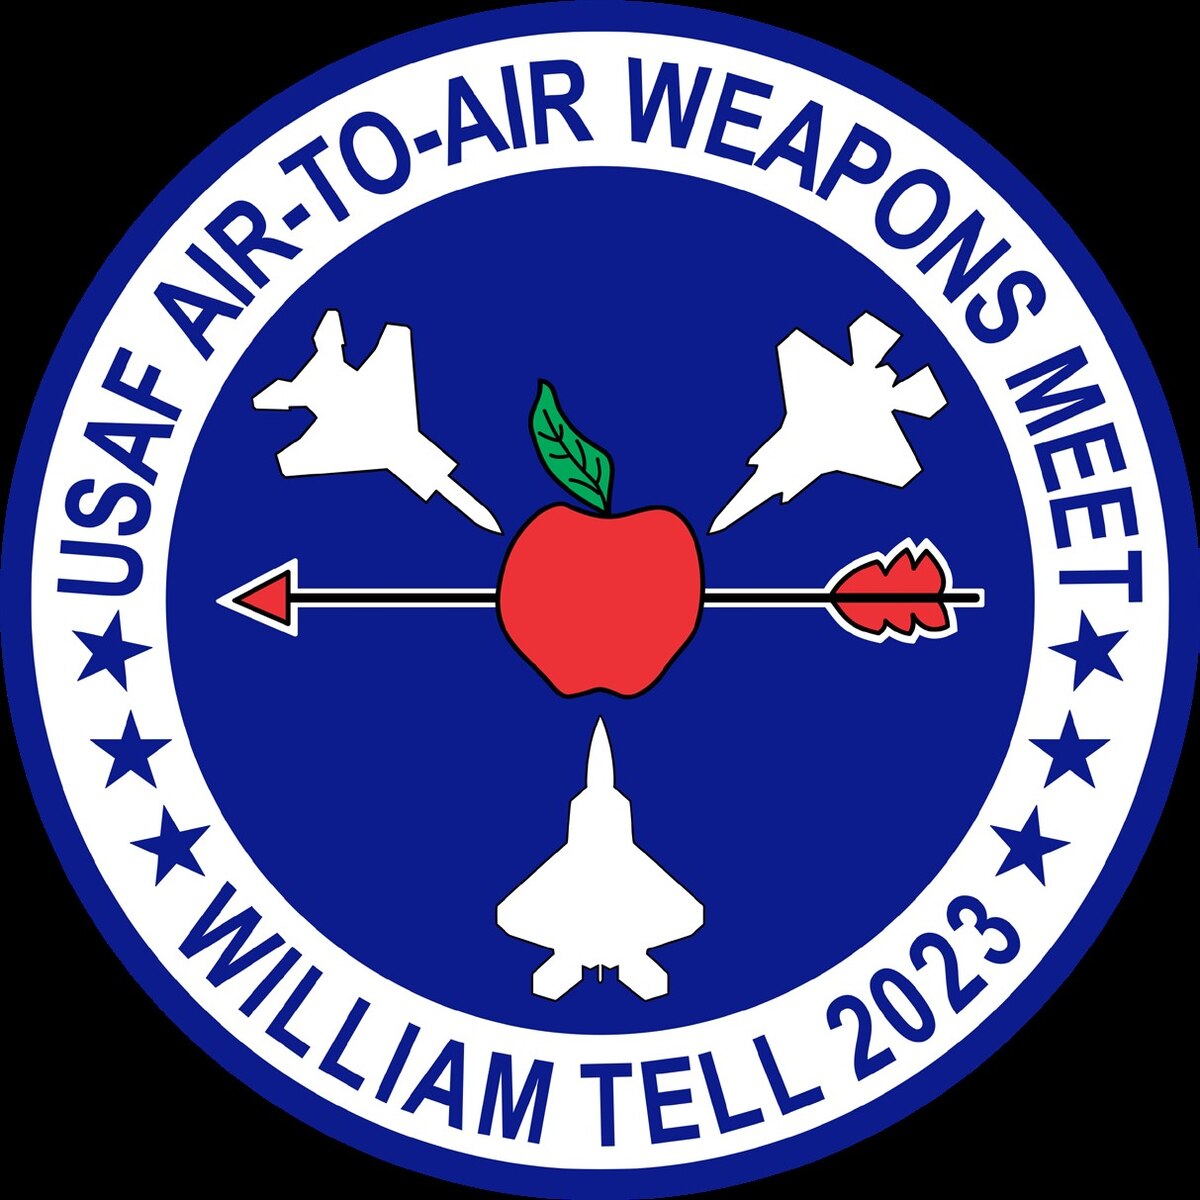 Graphics: Patch for William Tell 2023.